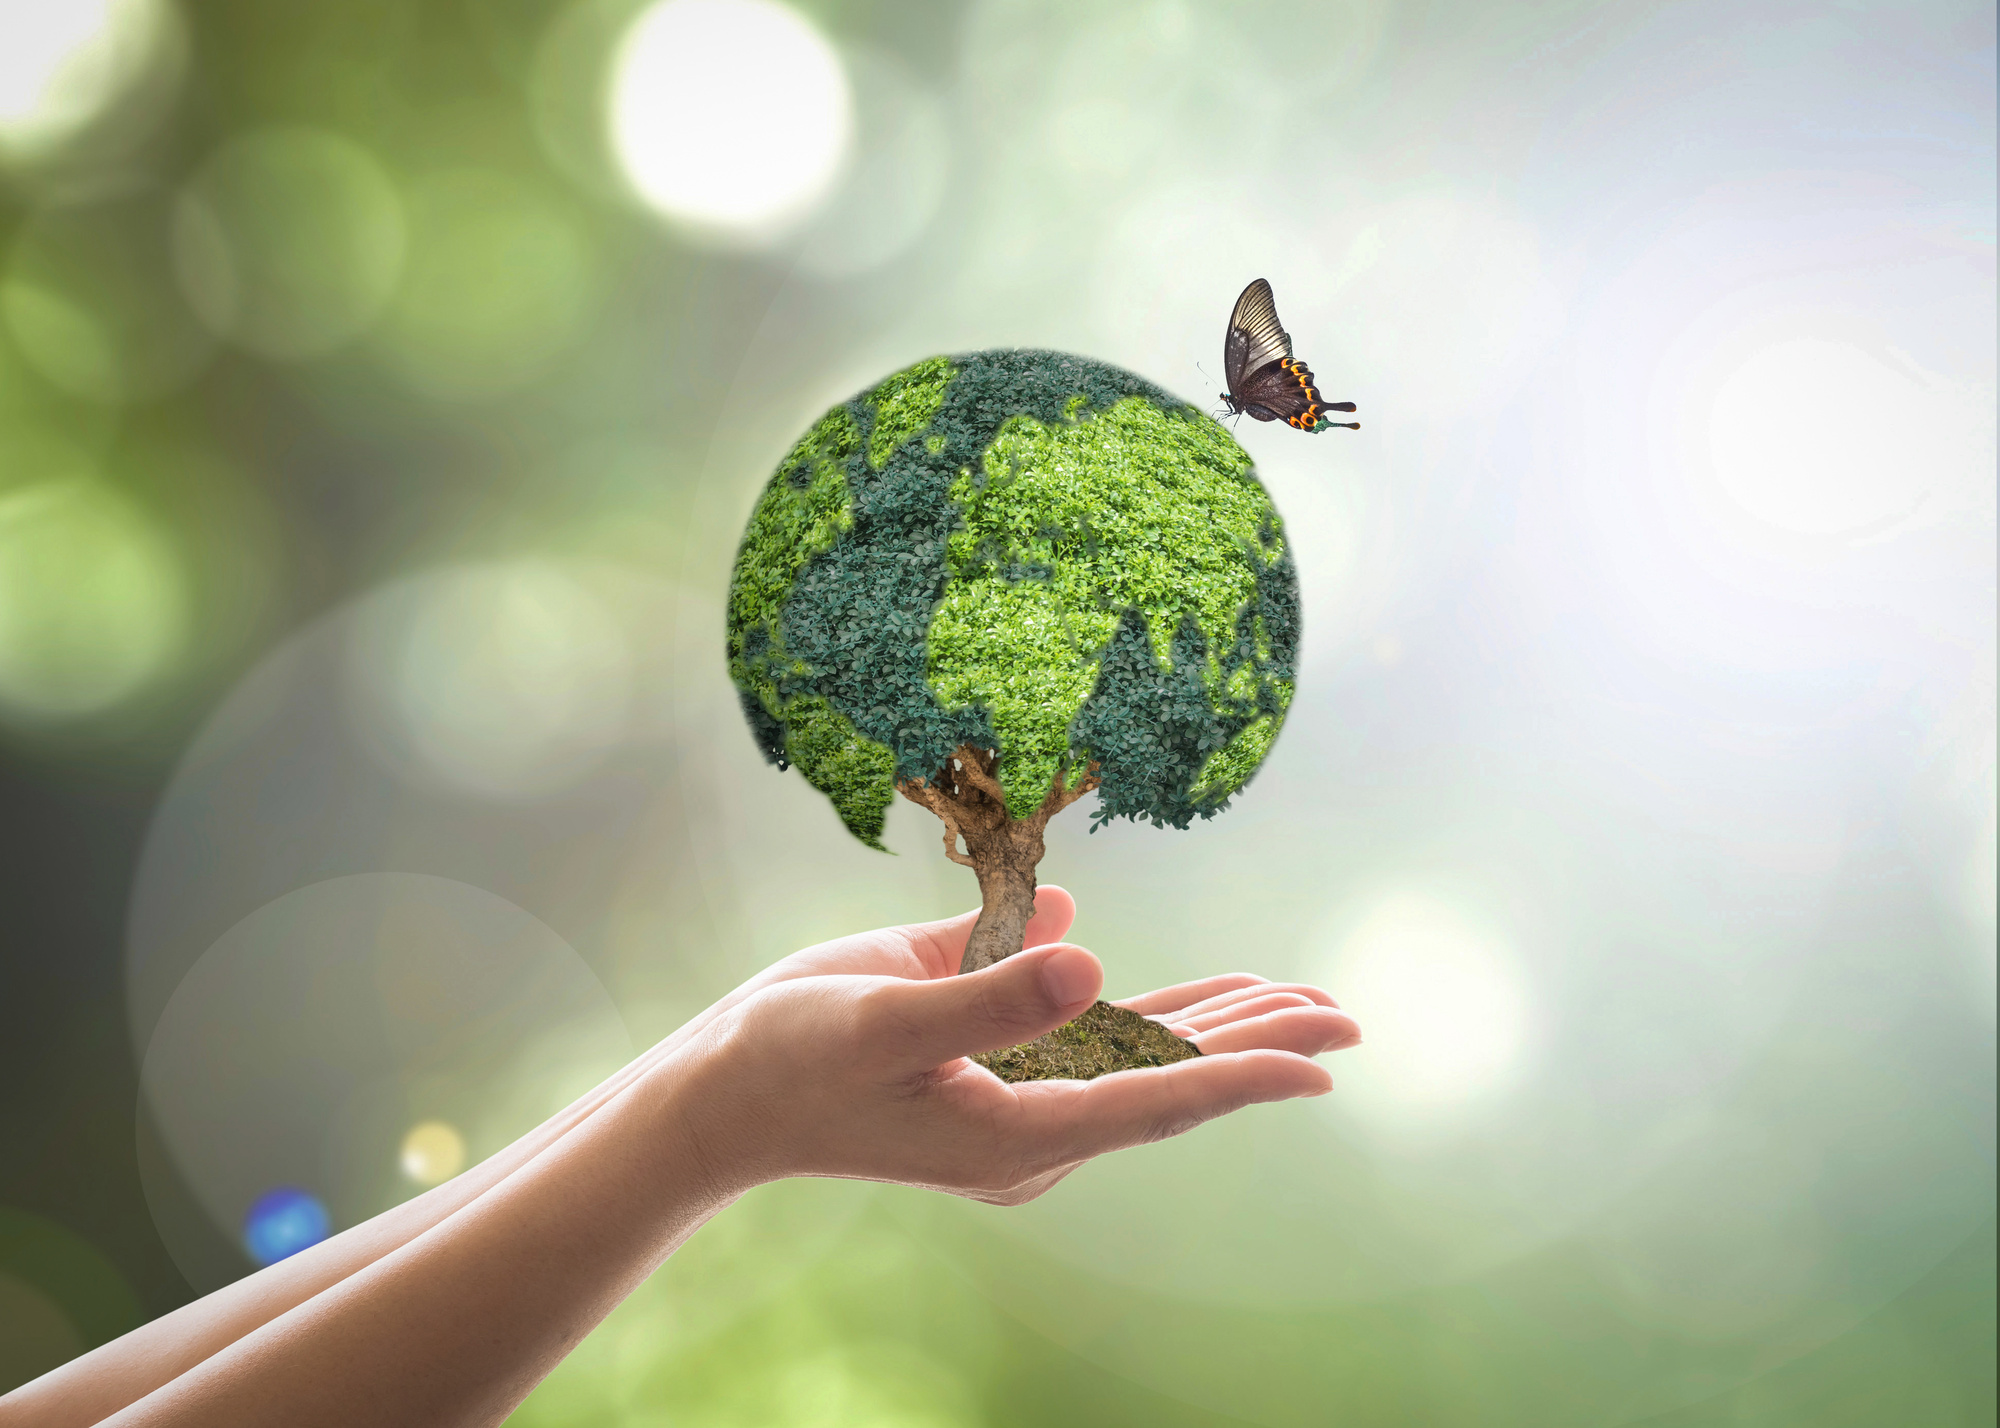  A hand holding a small tree shaped like the Earth with green leaves and a butterfly on top of it, symbolizing sustainable forest investment for environmental sustainability.